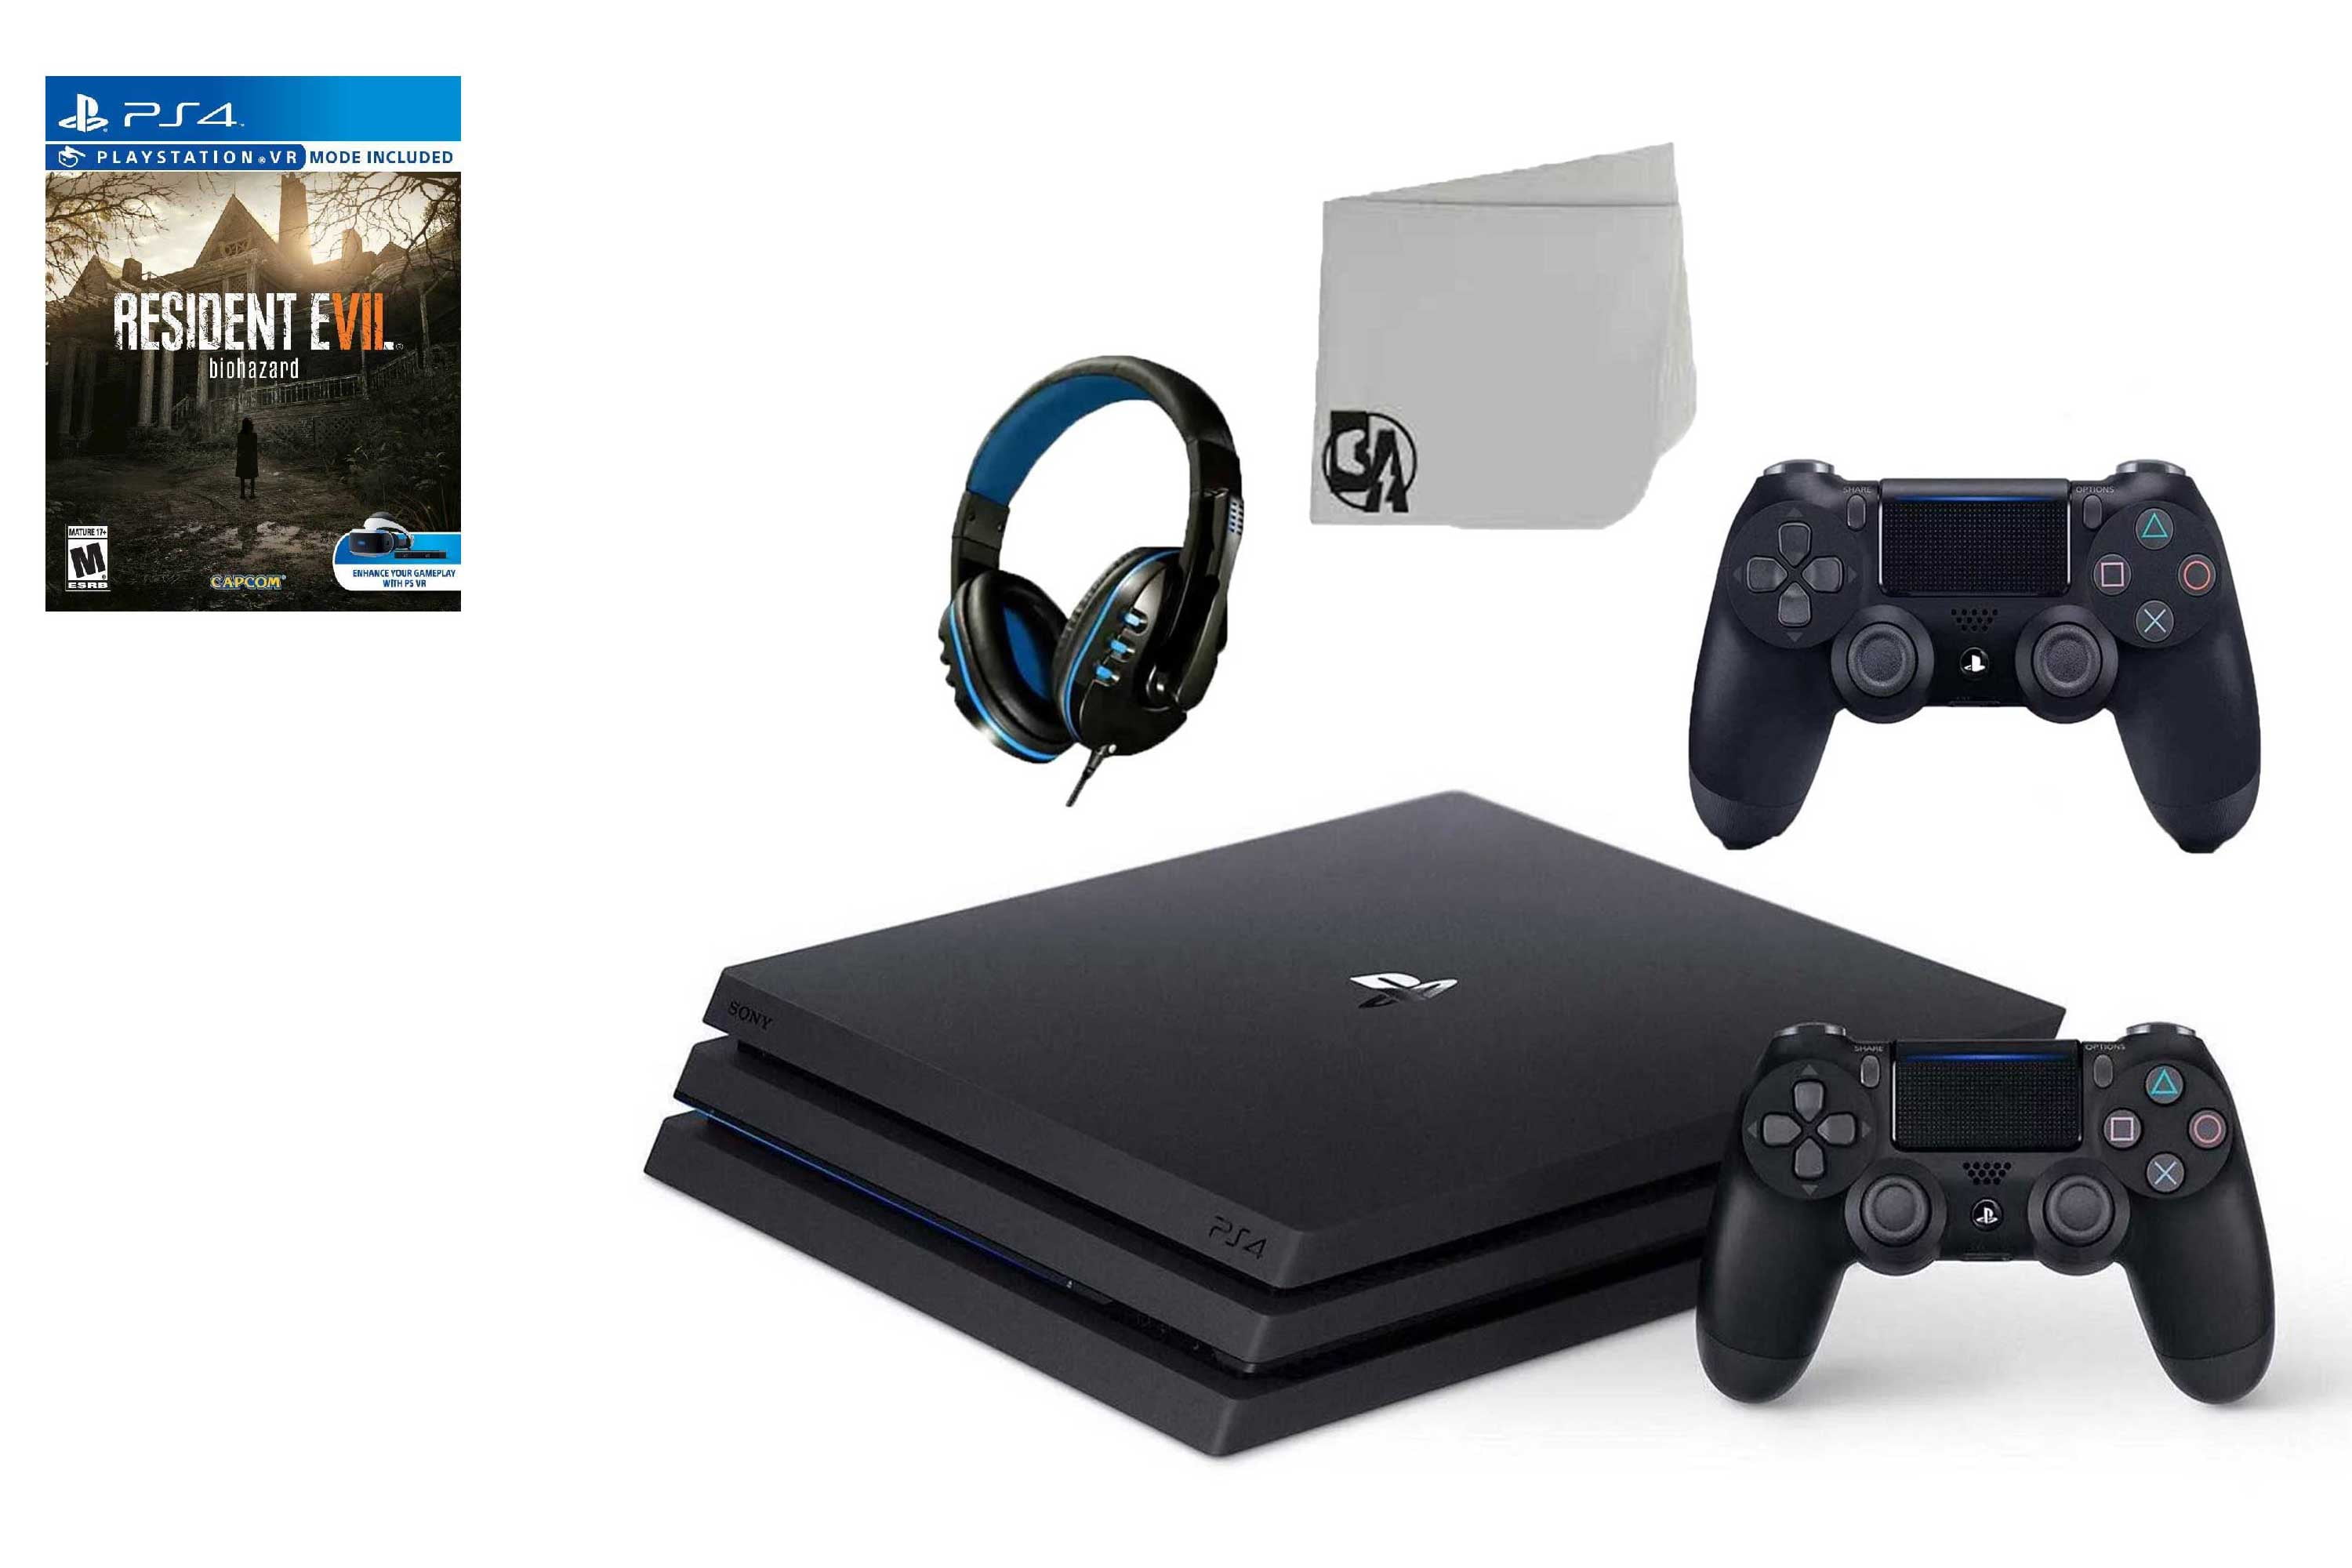 Console PlayStation 4 Pro : : Games e Consoles